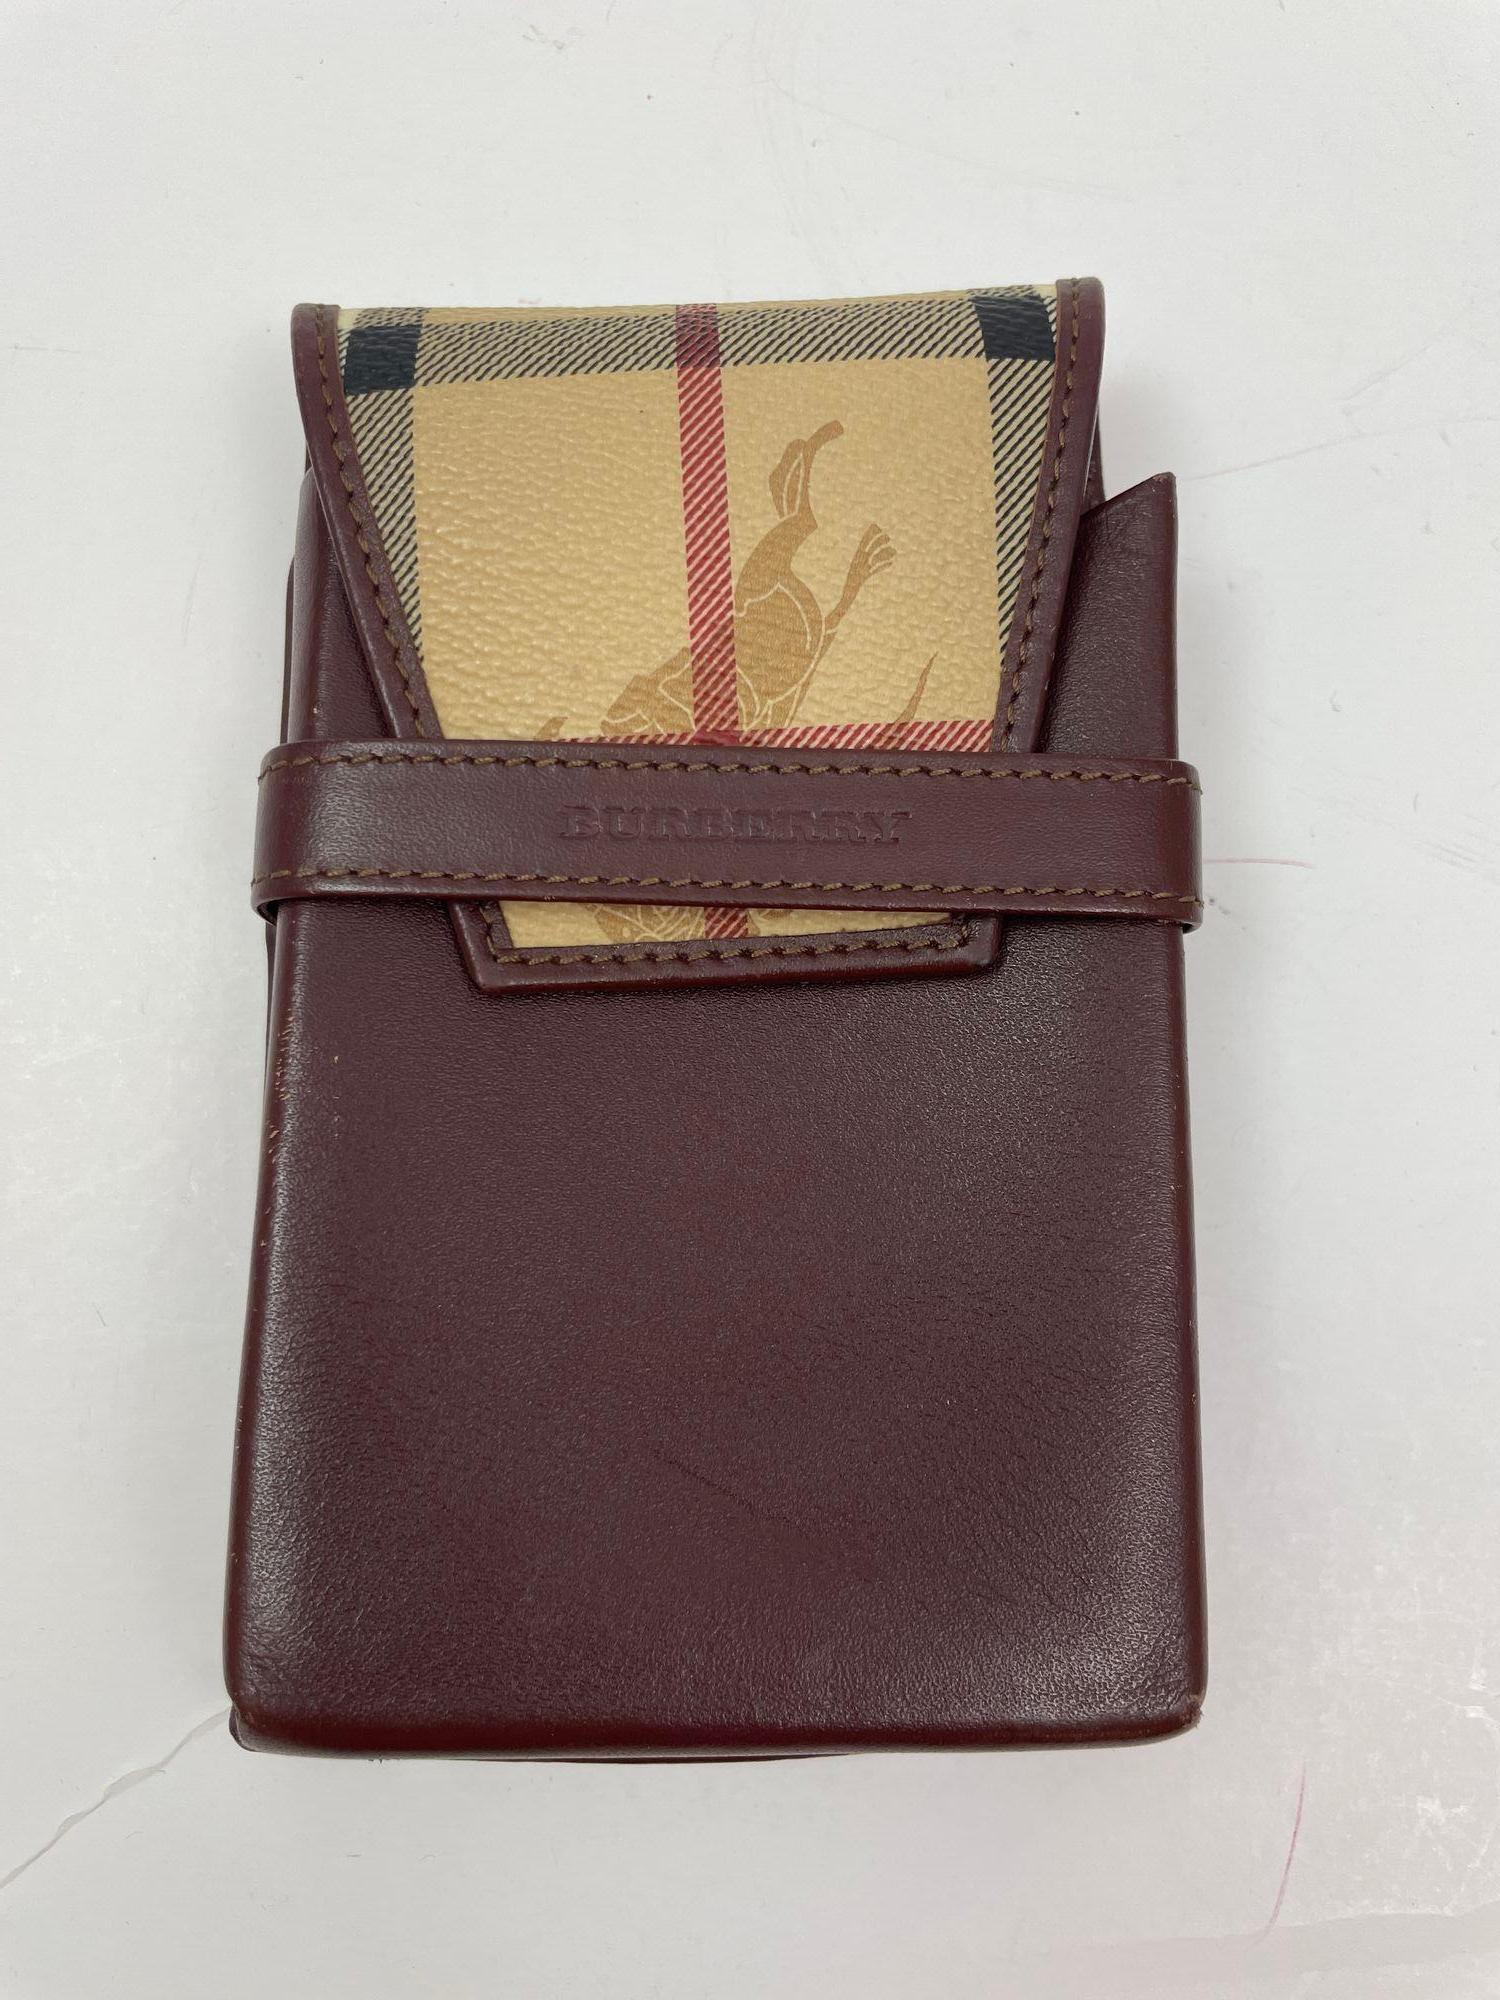 Vintage Burberry cigarette case or wallet with flap closure.
Good condition vintage cigarette pack holder, great to use as a wallet or to store keys, phone, lipsticks, playing game cards.
Vintage Burberry London leather case or wallet.
You can carry